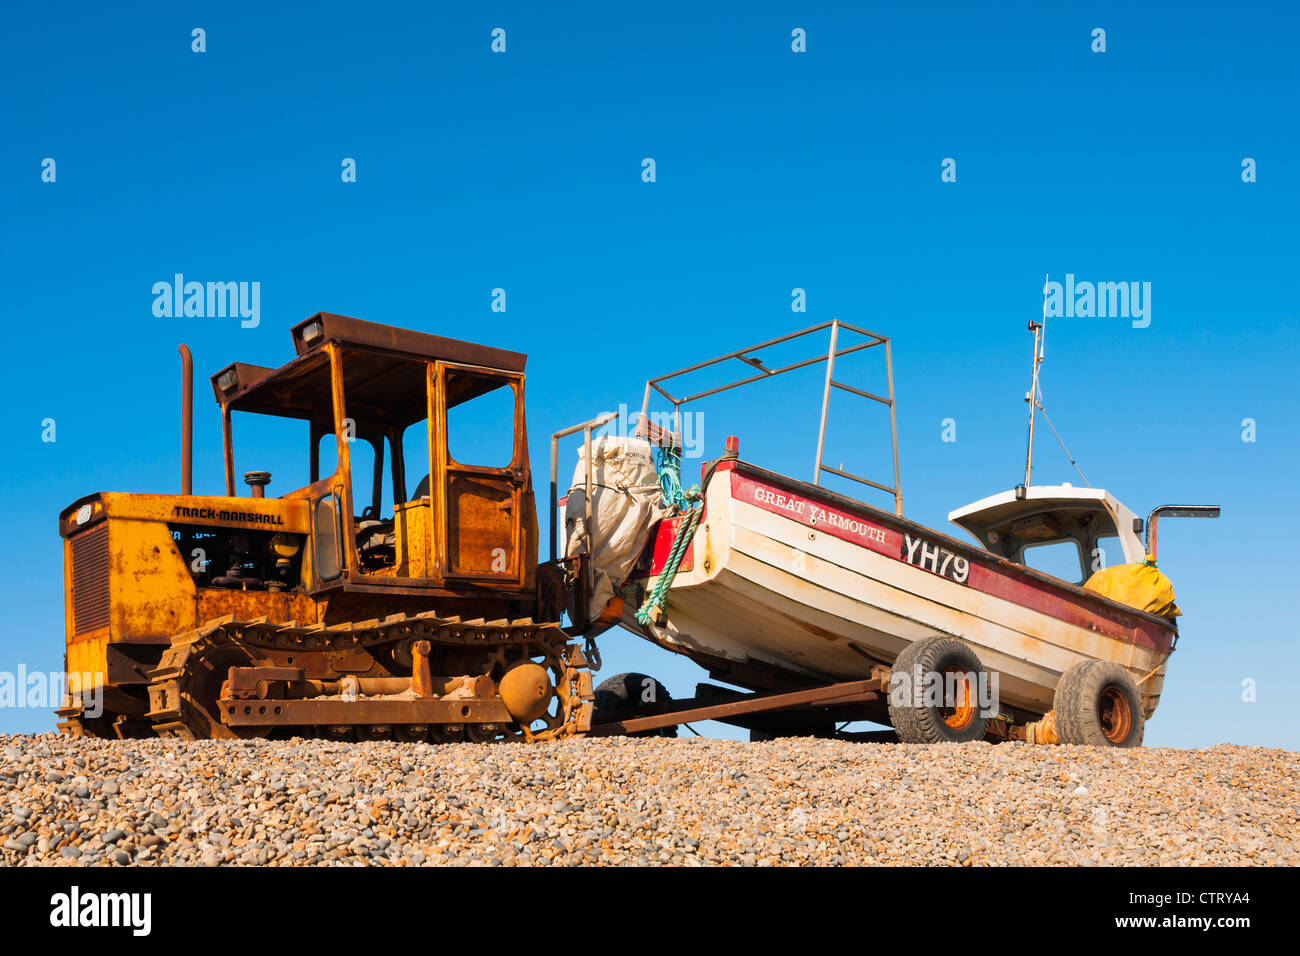 Boat, Crab fishing, Beached, Tractor, Trailer Stock Photo